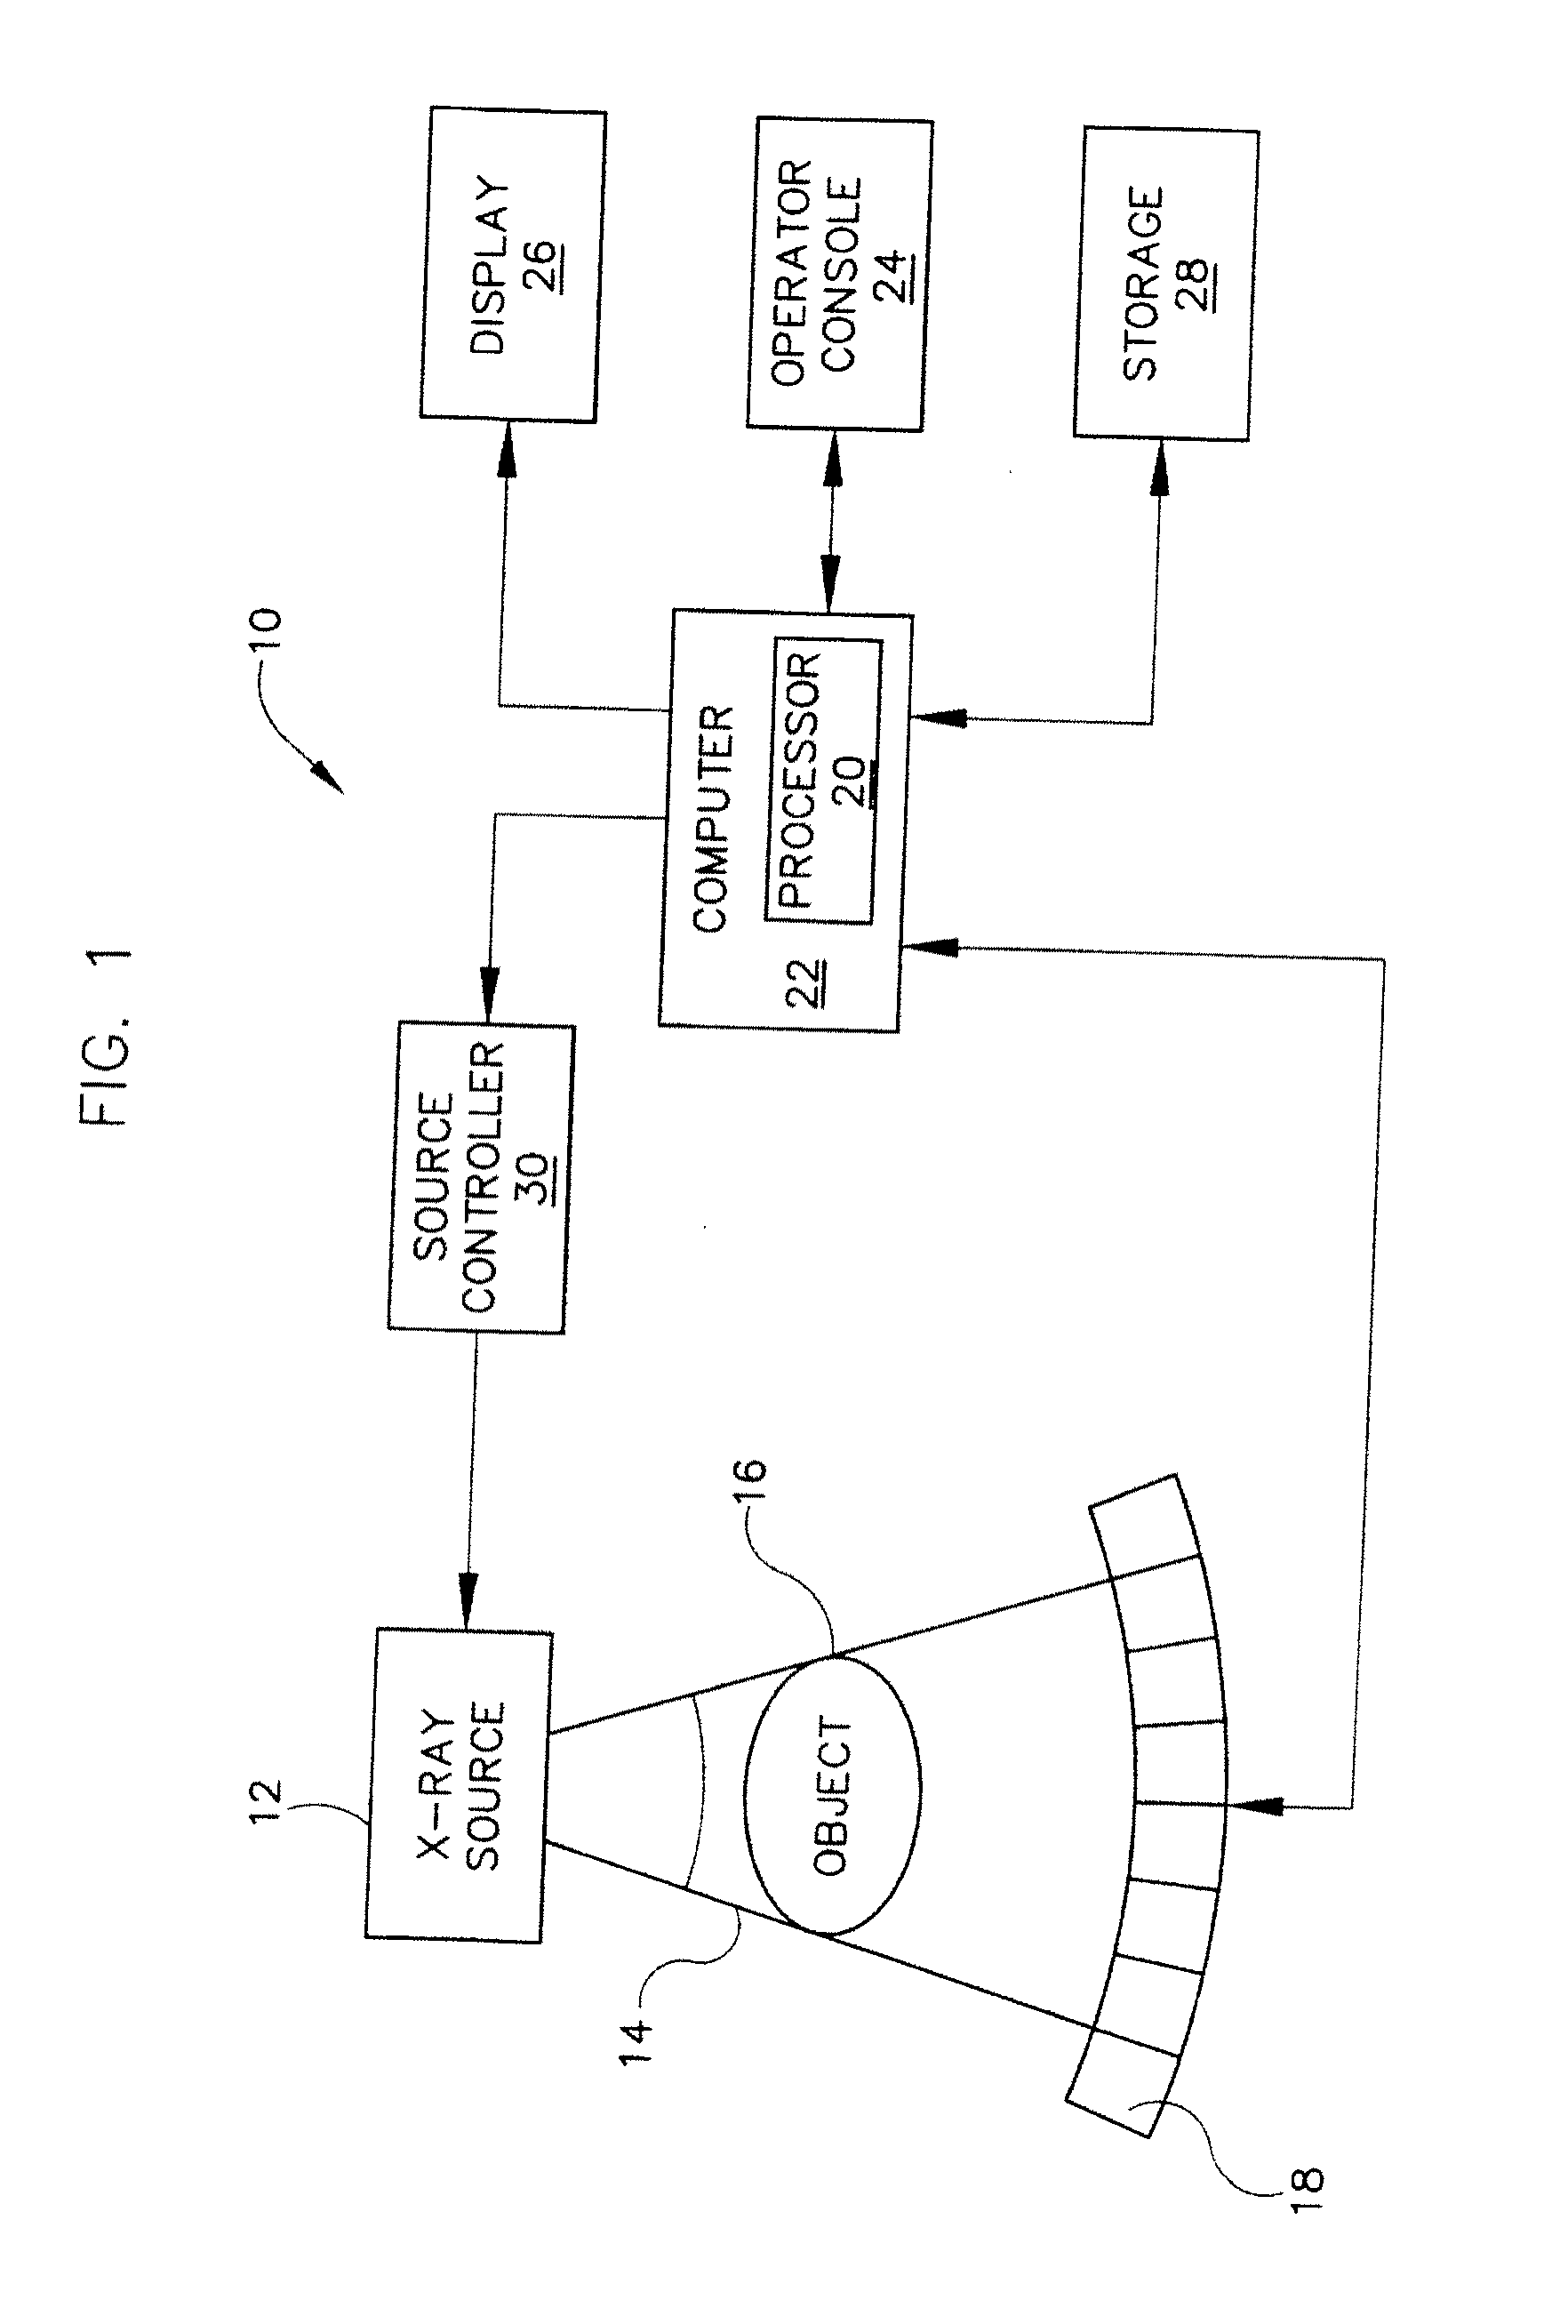 Apparatus for increasing radiative heat transfer in an x-ray tube and method of making same